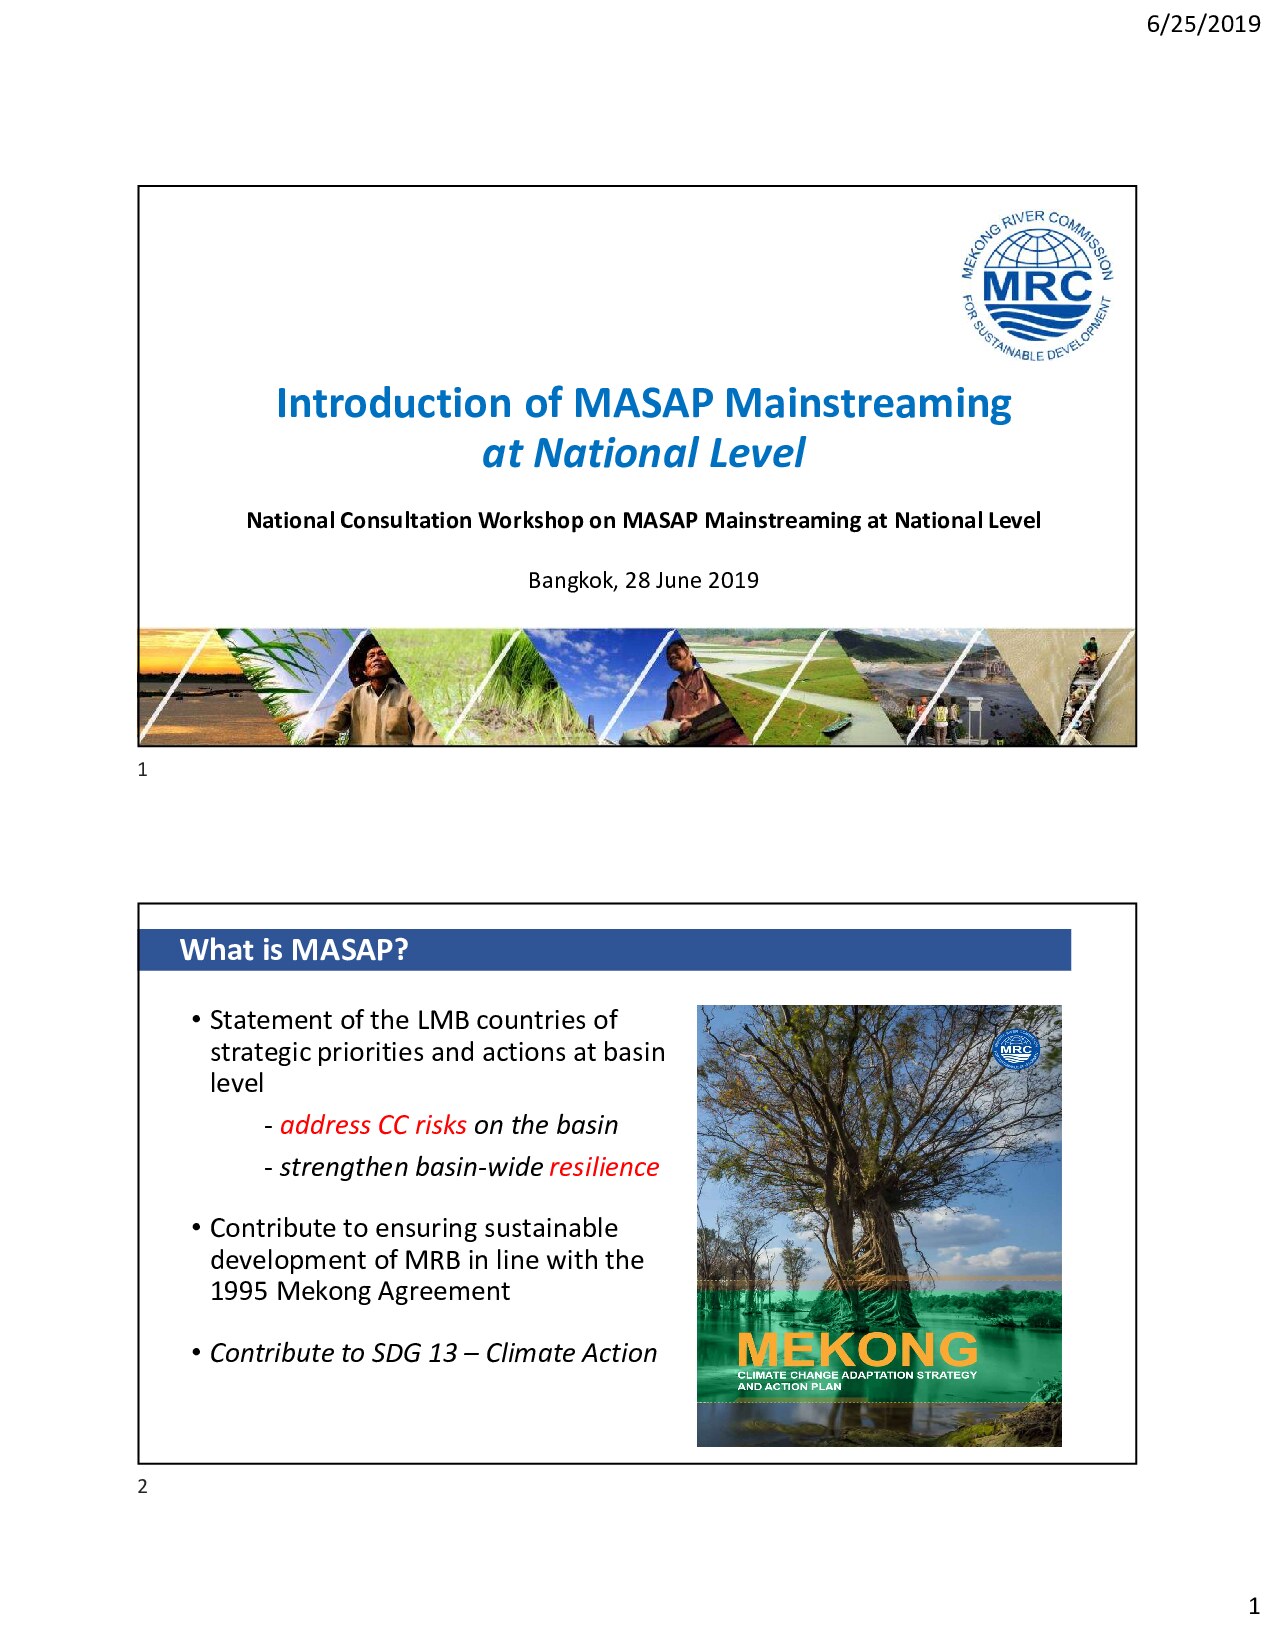 Introduction of MASAP Mainstreaming at National Level